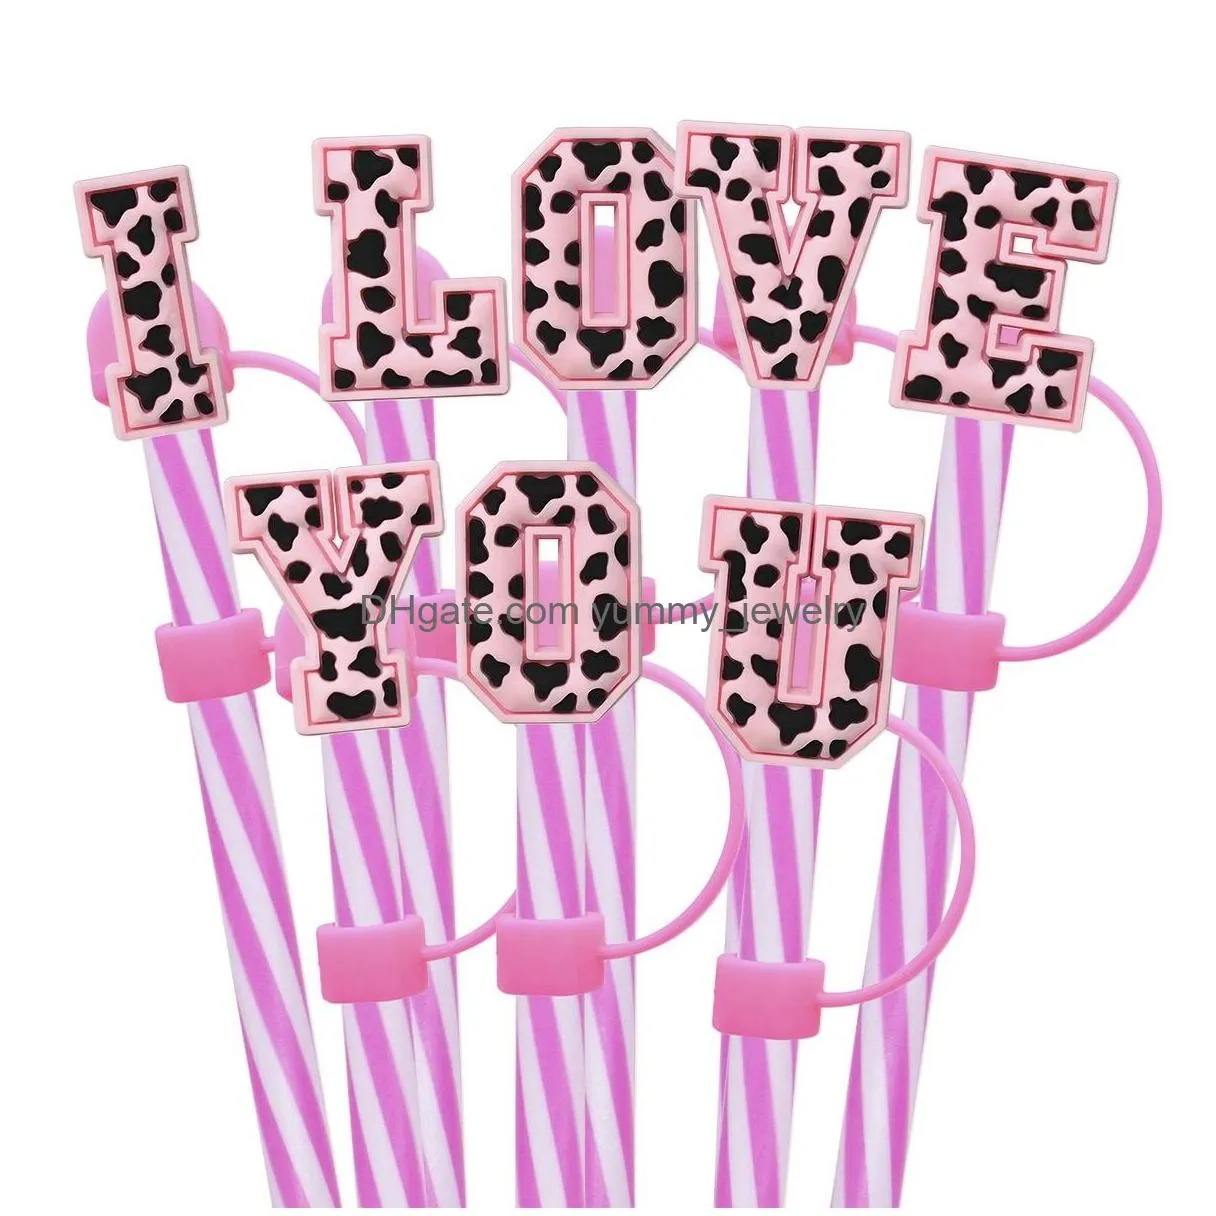 36colors baby girl leopard alphabets silicone straw toppers accessories cover charms reusable splash proof drinking dust plug decorative 8mm/10mmstraw